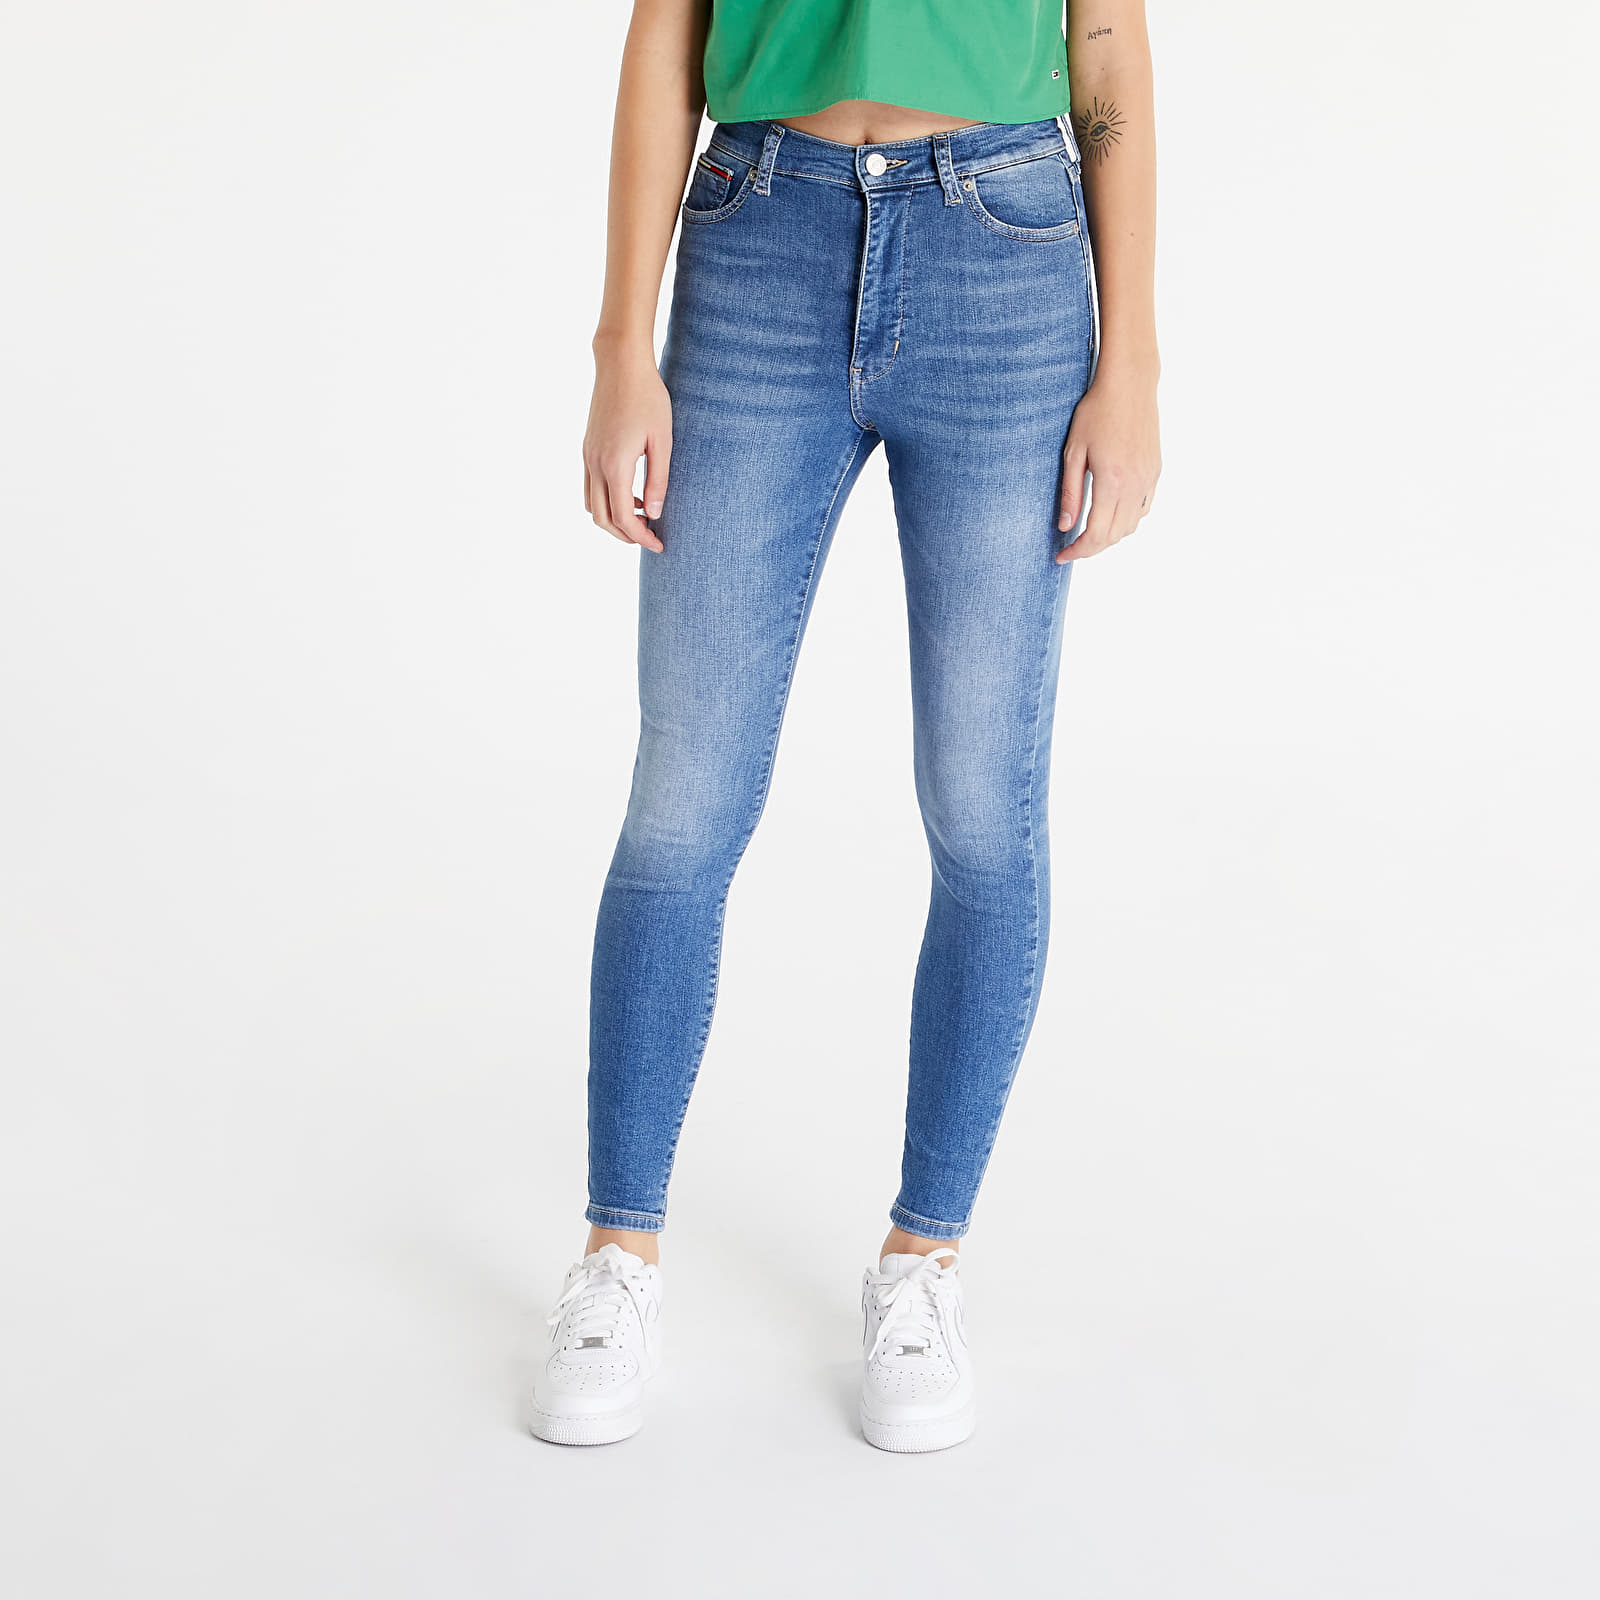 Super Jeans High JEANS Skinny Sylvia TOMMY Jeans Queens Rise | Denim Light